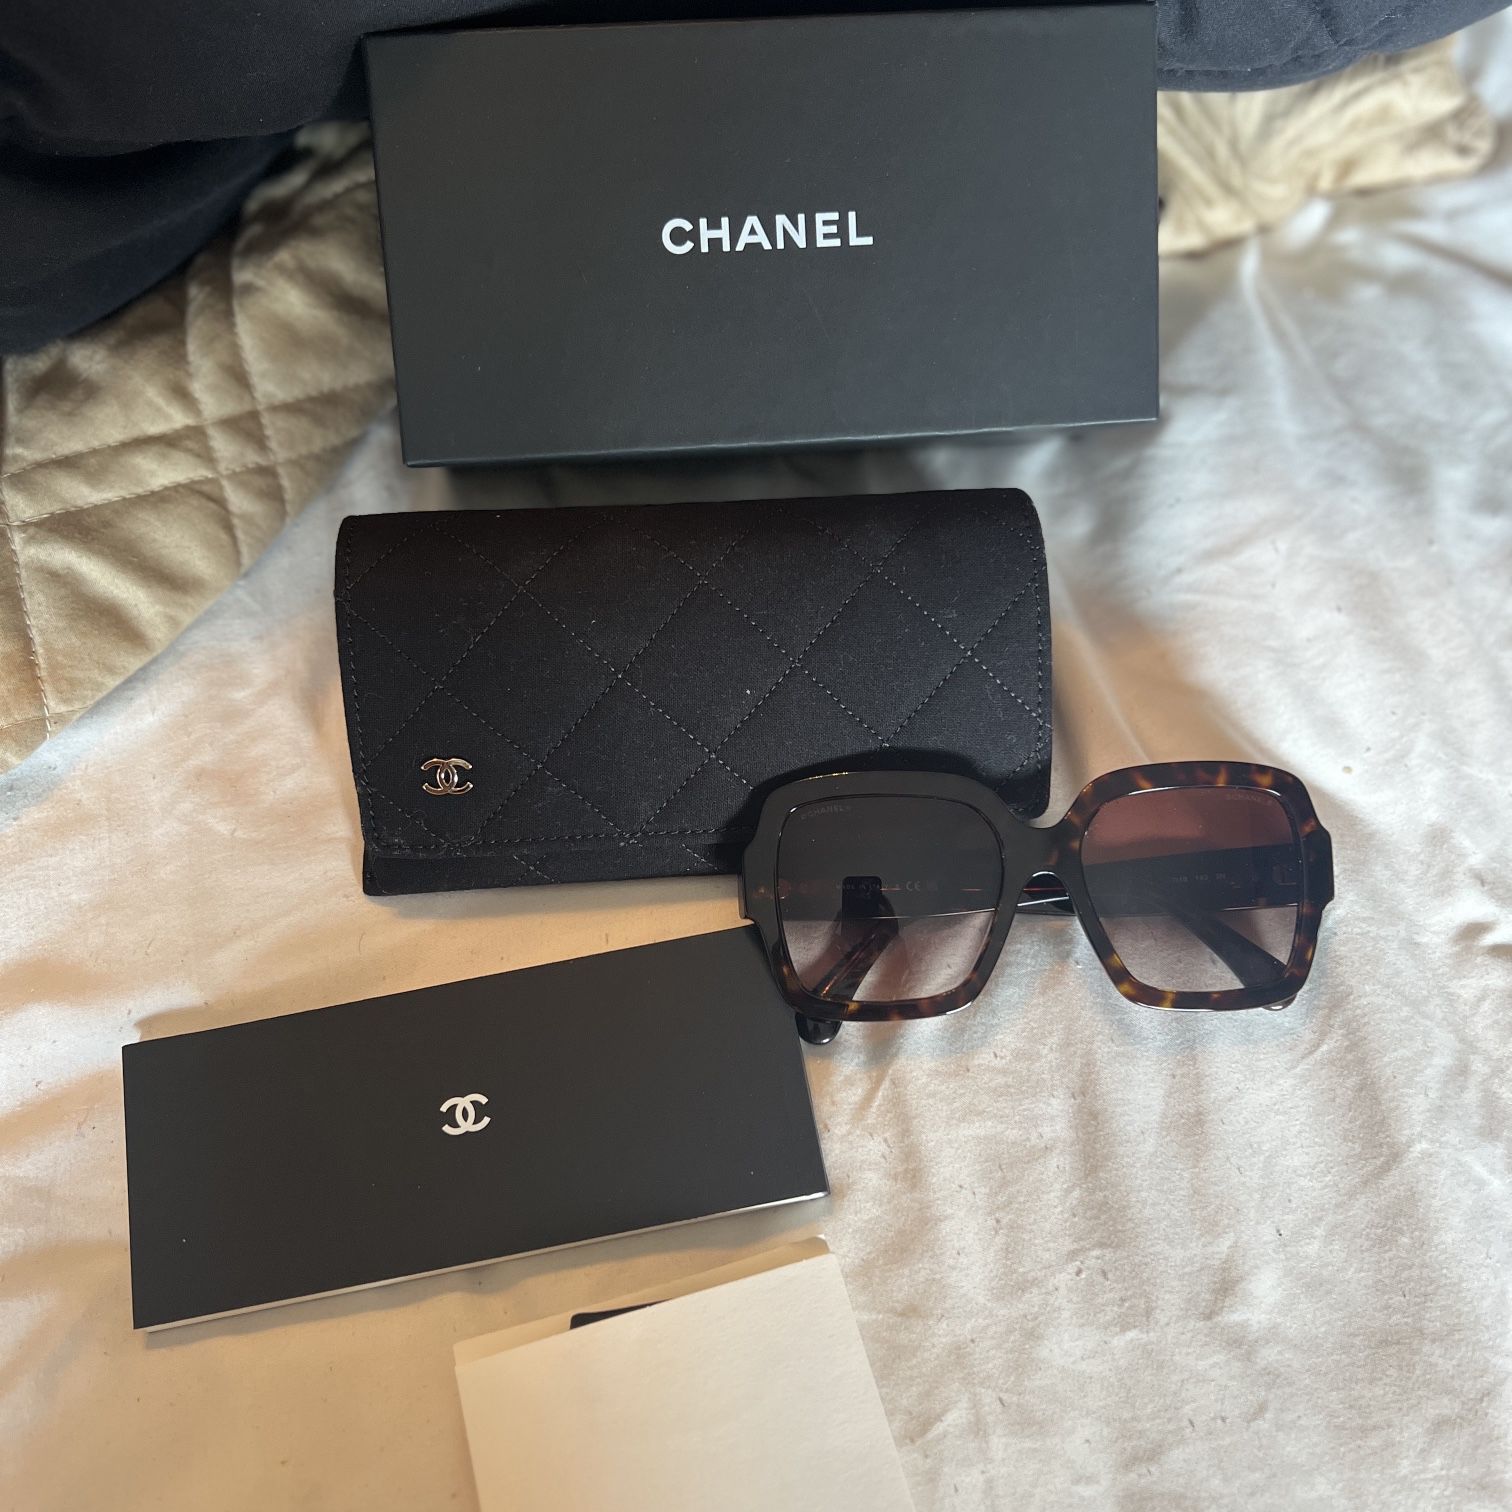 Chanel Sunglasses for Sale in The Bronx, NY - OfferUp